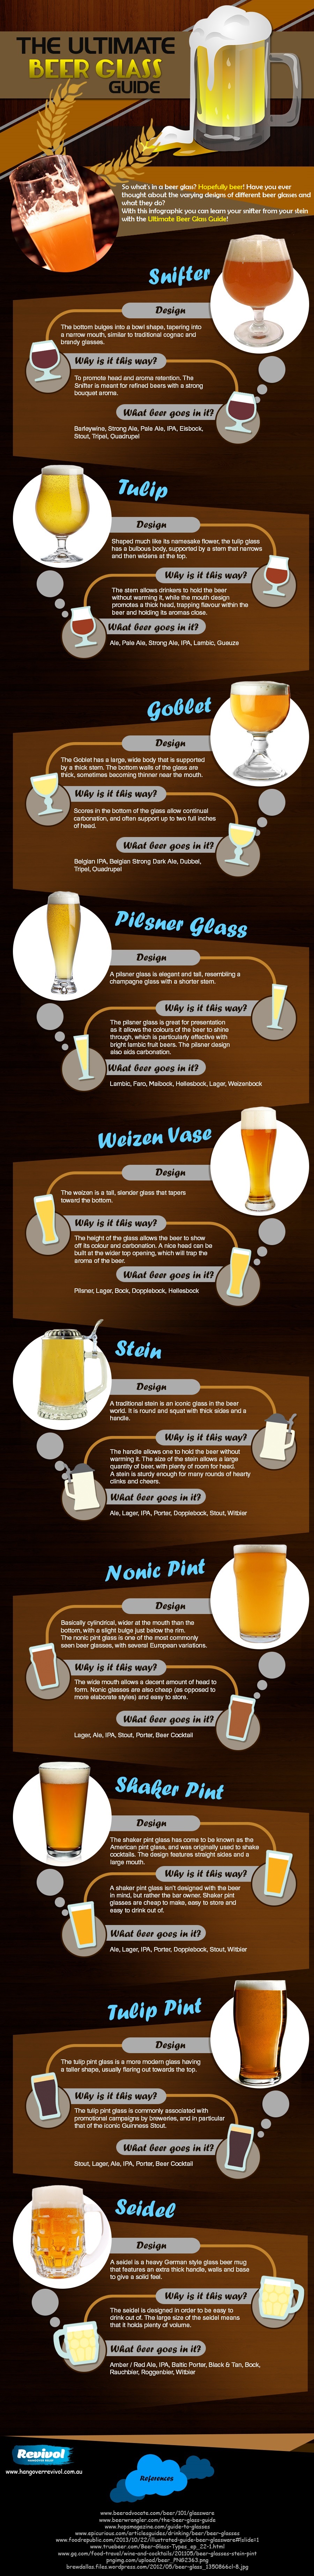 The Ultimate Beer Glass Guide